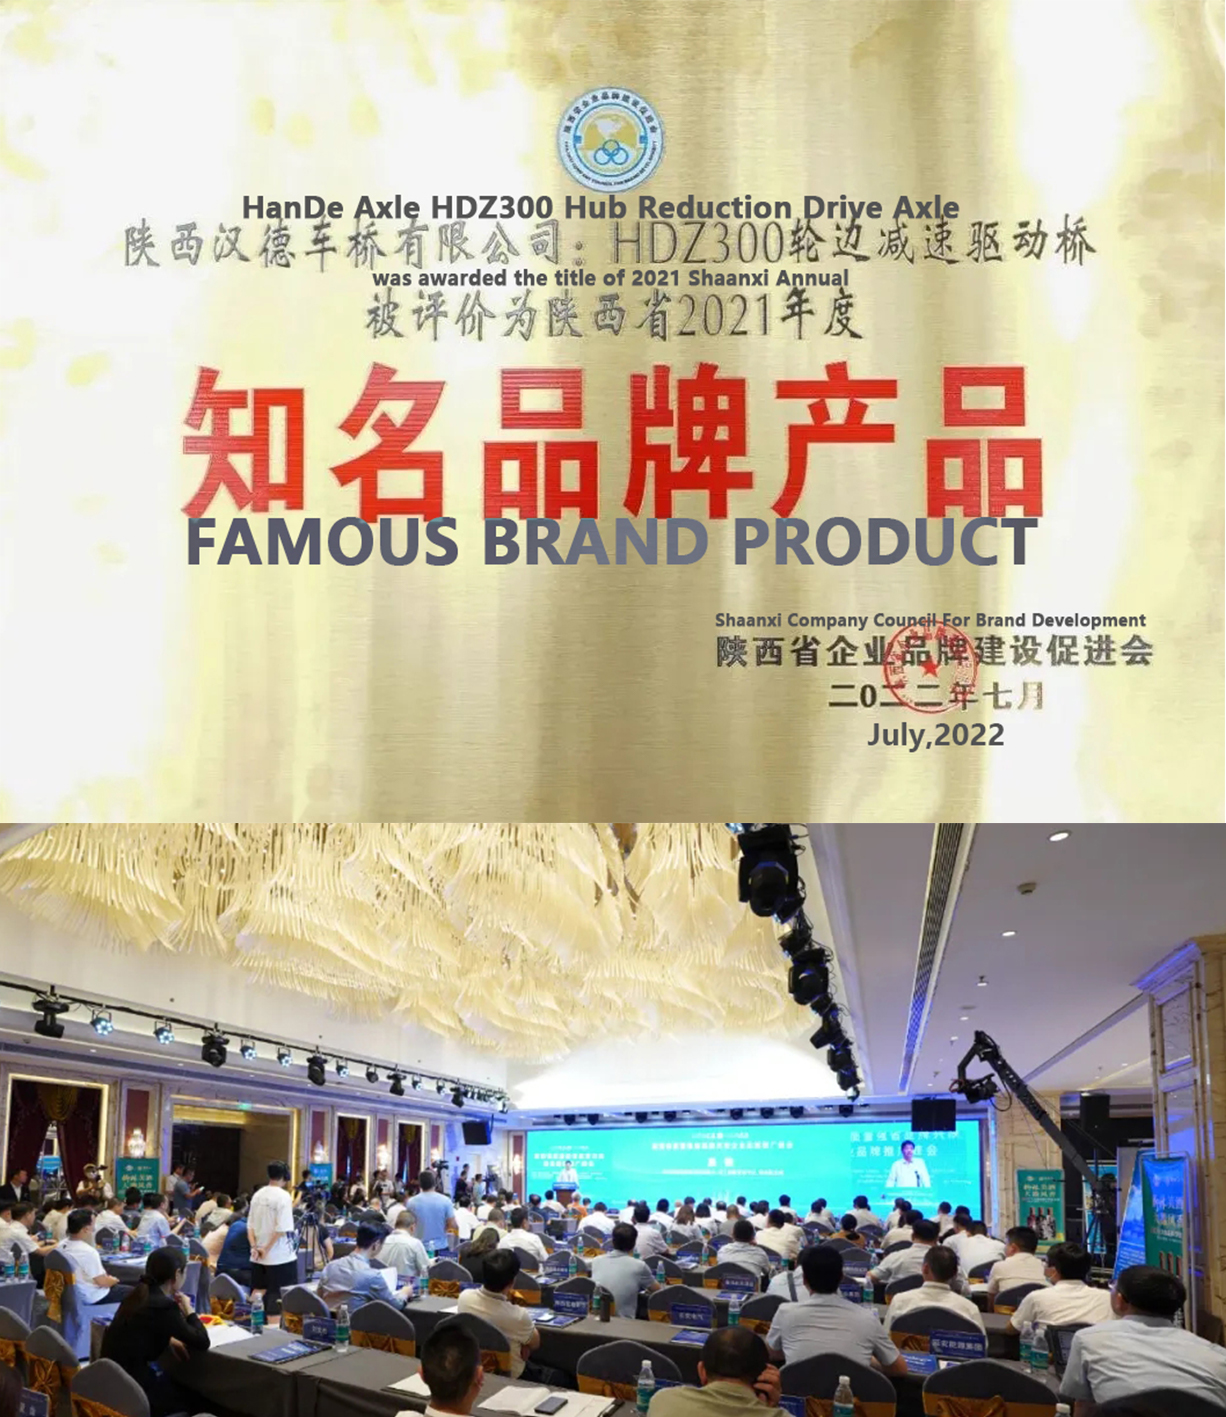 HanDe Axle HDZ300 Hub Reduction Drive Axle was awarded the title of 2021 Shaanxi Annual Famous Brand Product”